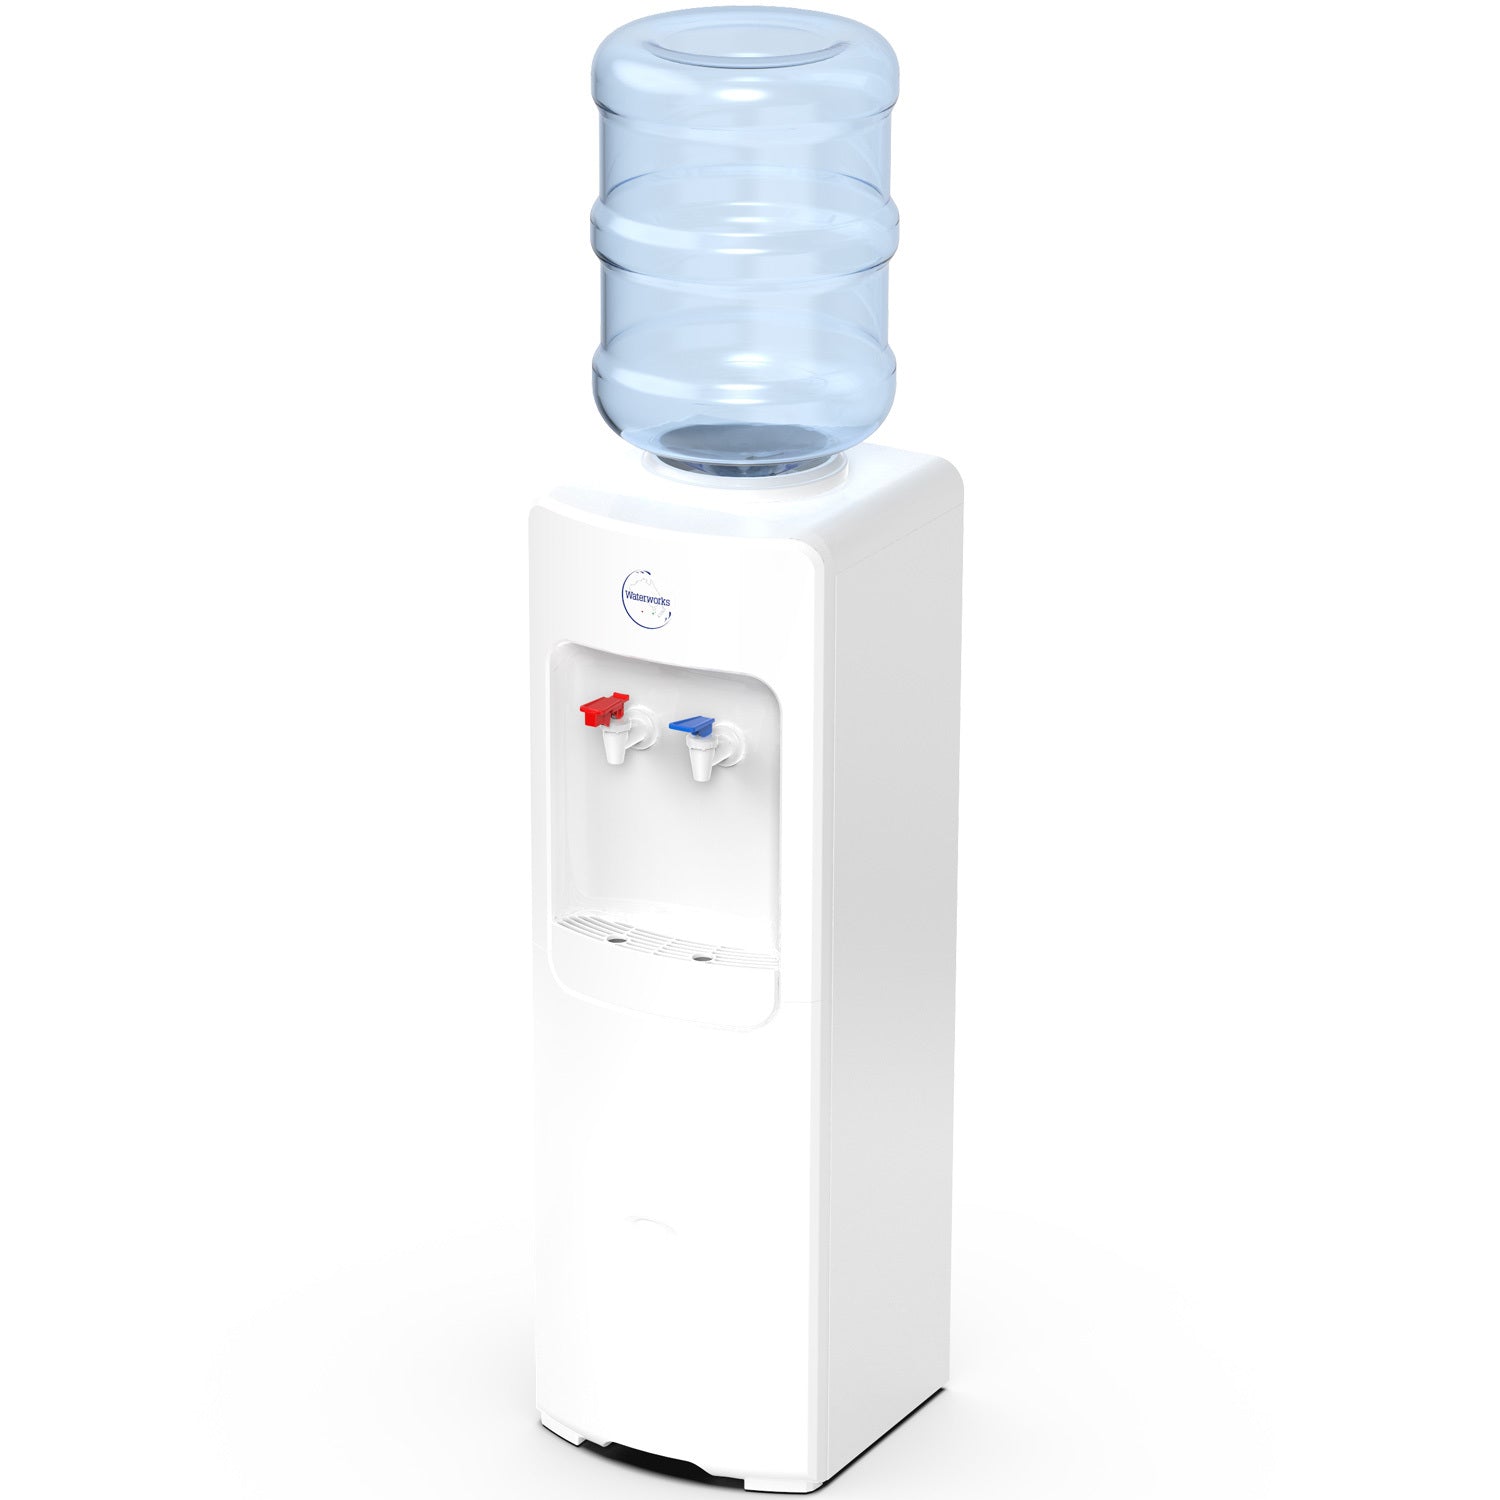 WATERWORKS™ - B26 Series - Free Standing - Awesome Water